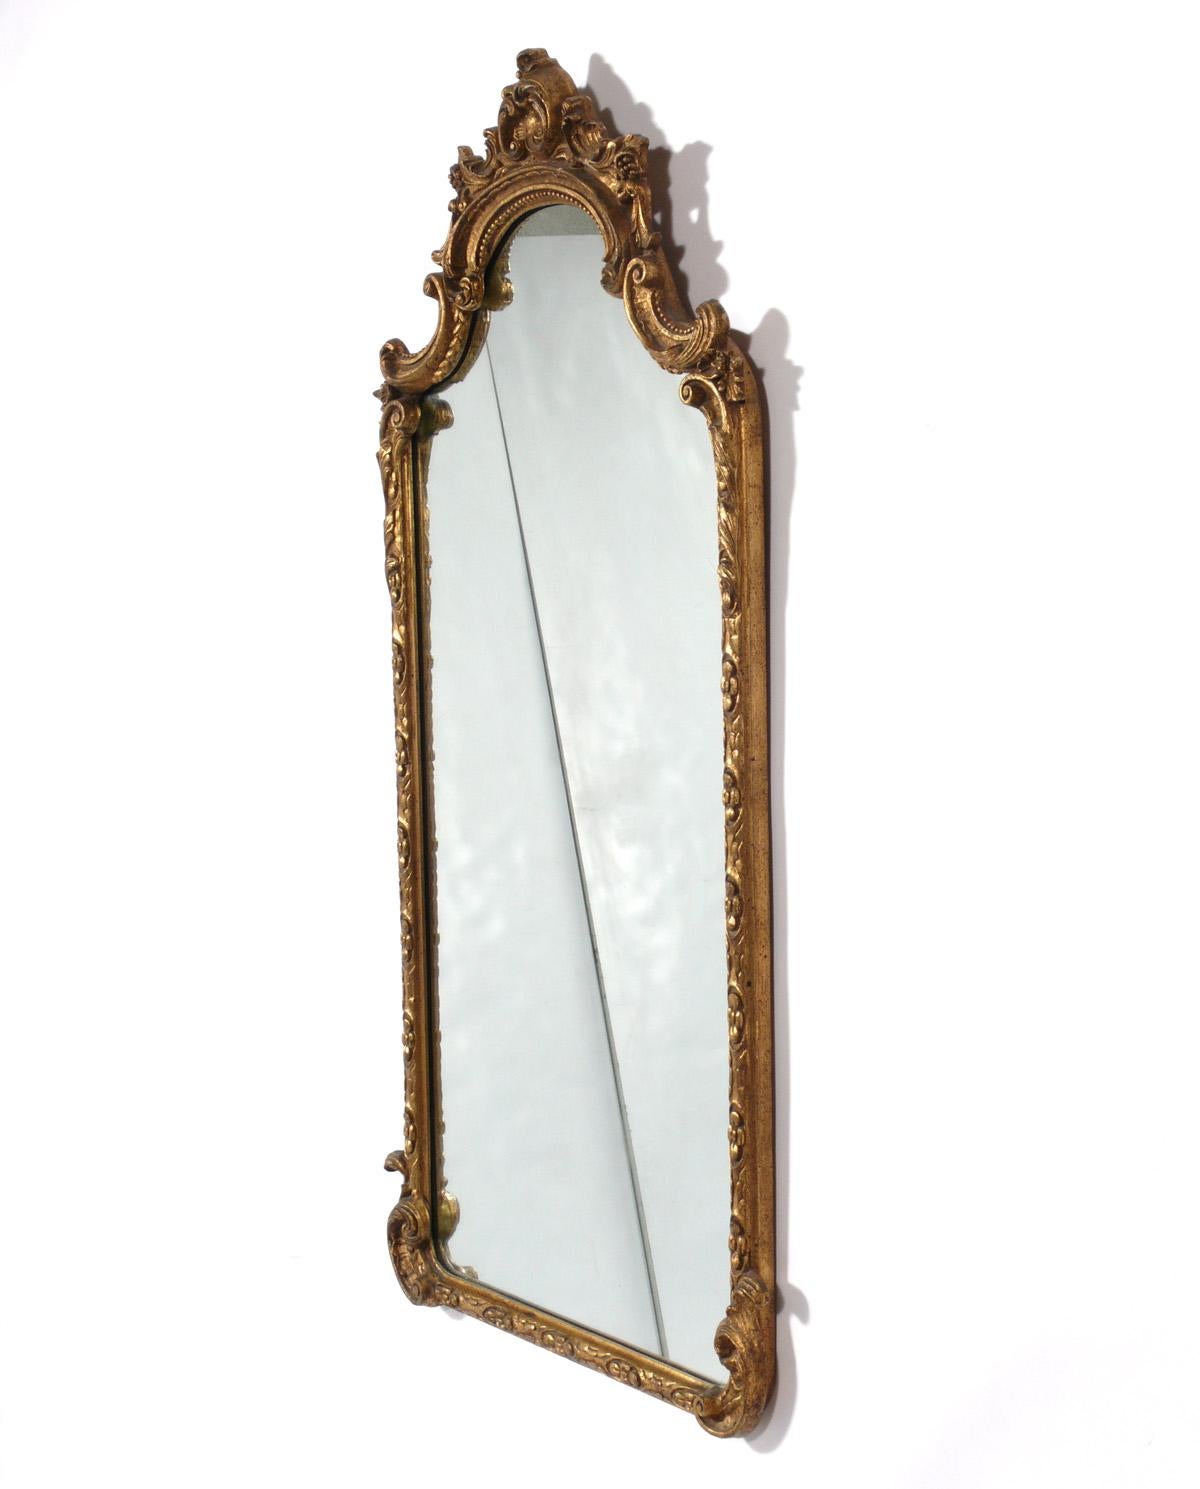 Gilt Mirror, probably Italian, circa 1940s. Retains wonderful original patina to the gilt wood frame and original mirrored glass. This rectangular shaped mirror is tall and thin, measuring height x width, making it a good candidate for a powder